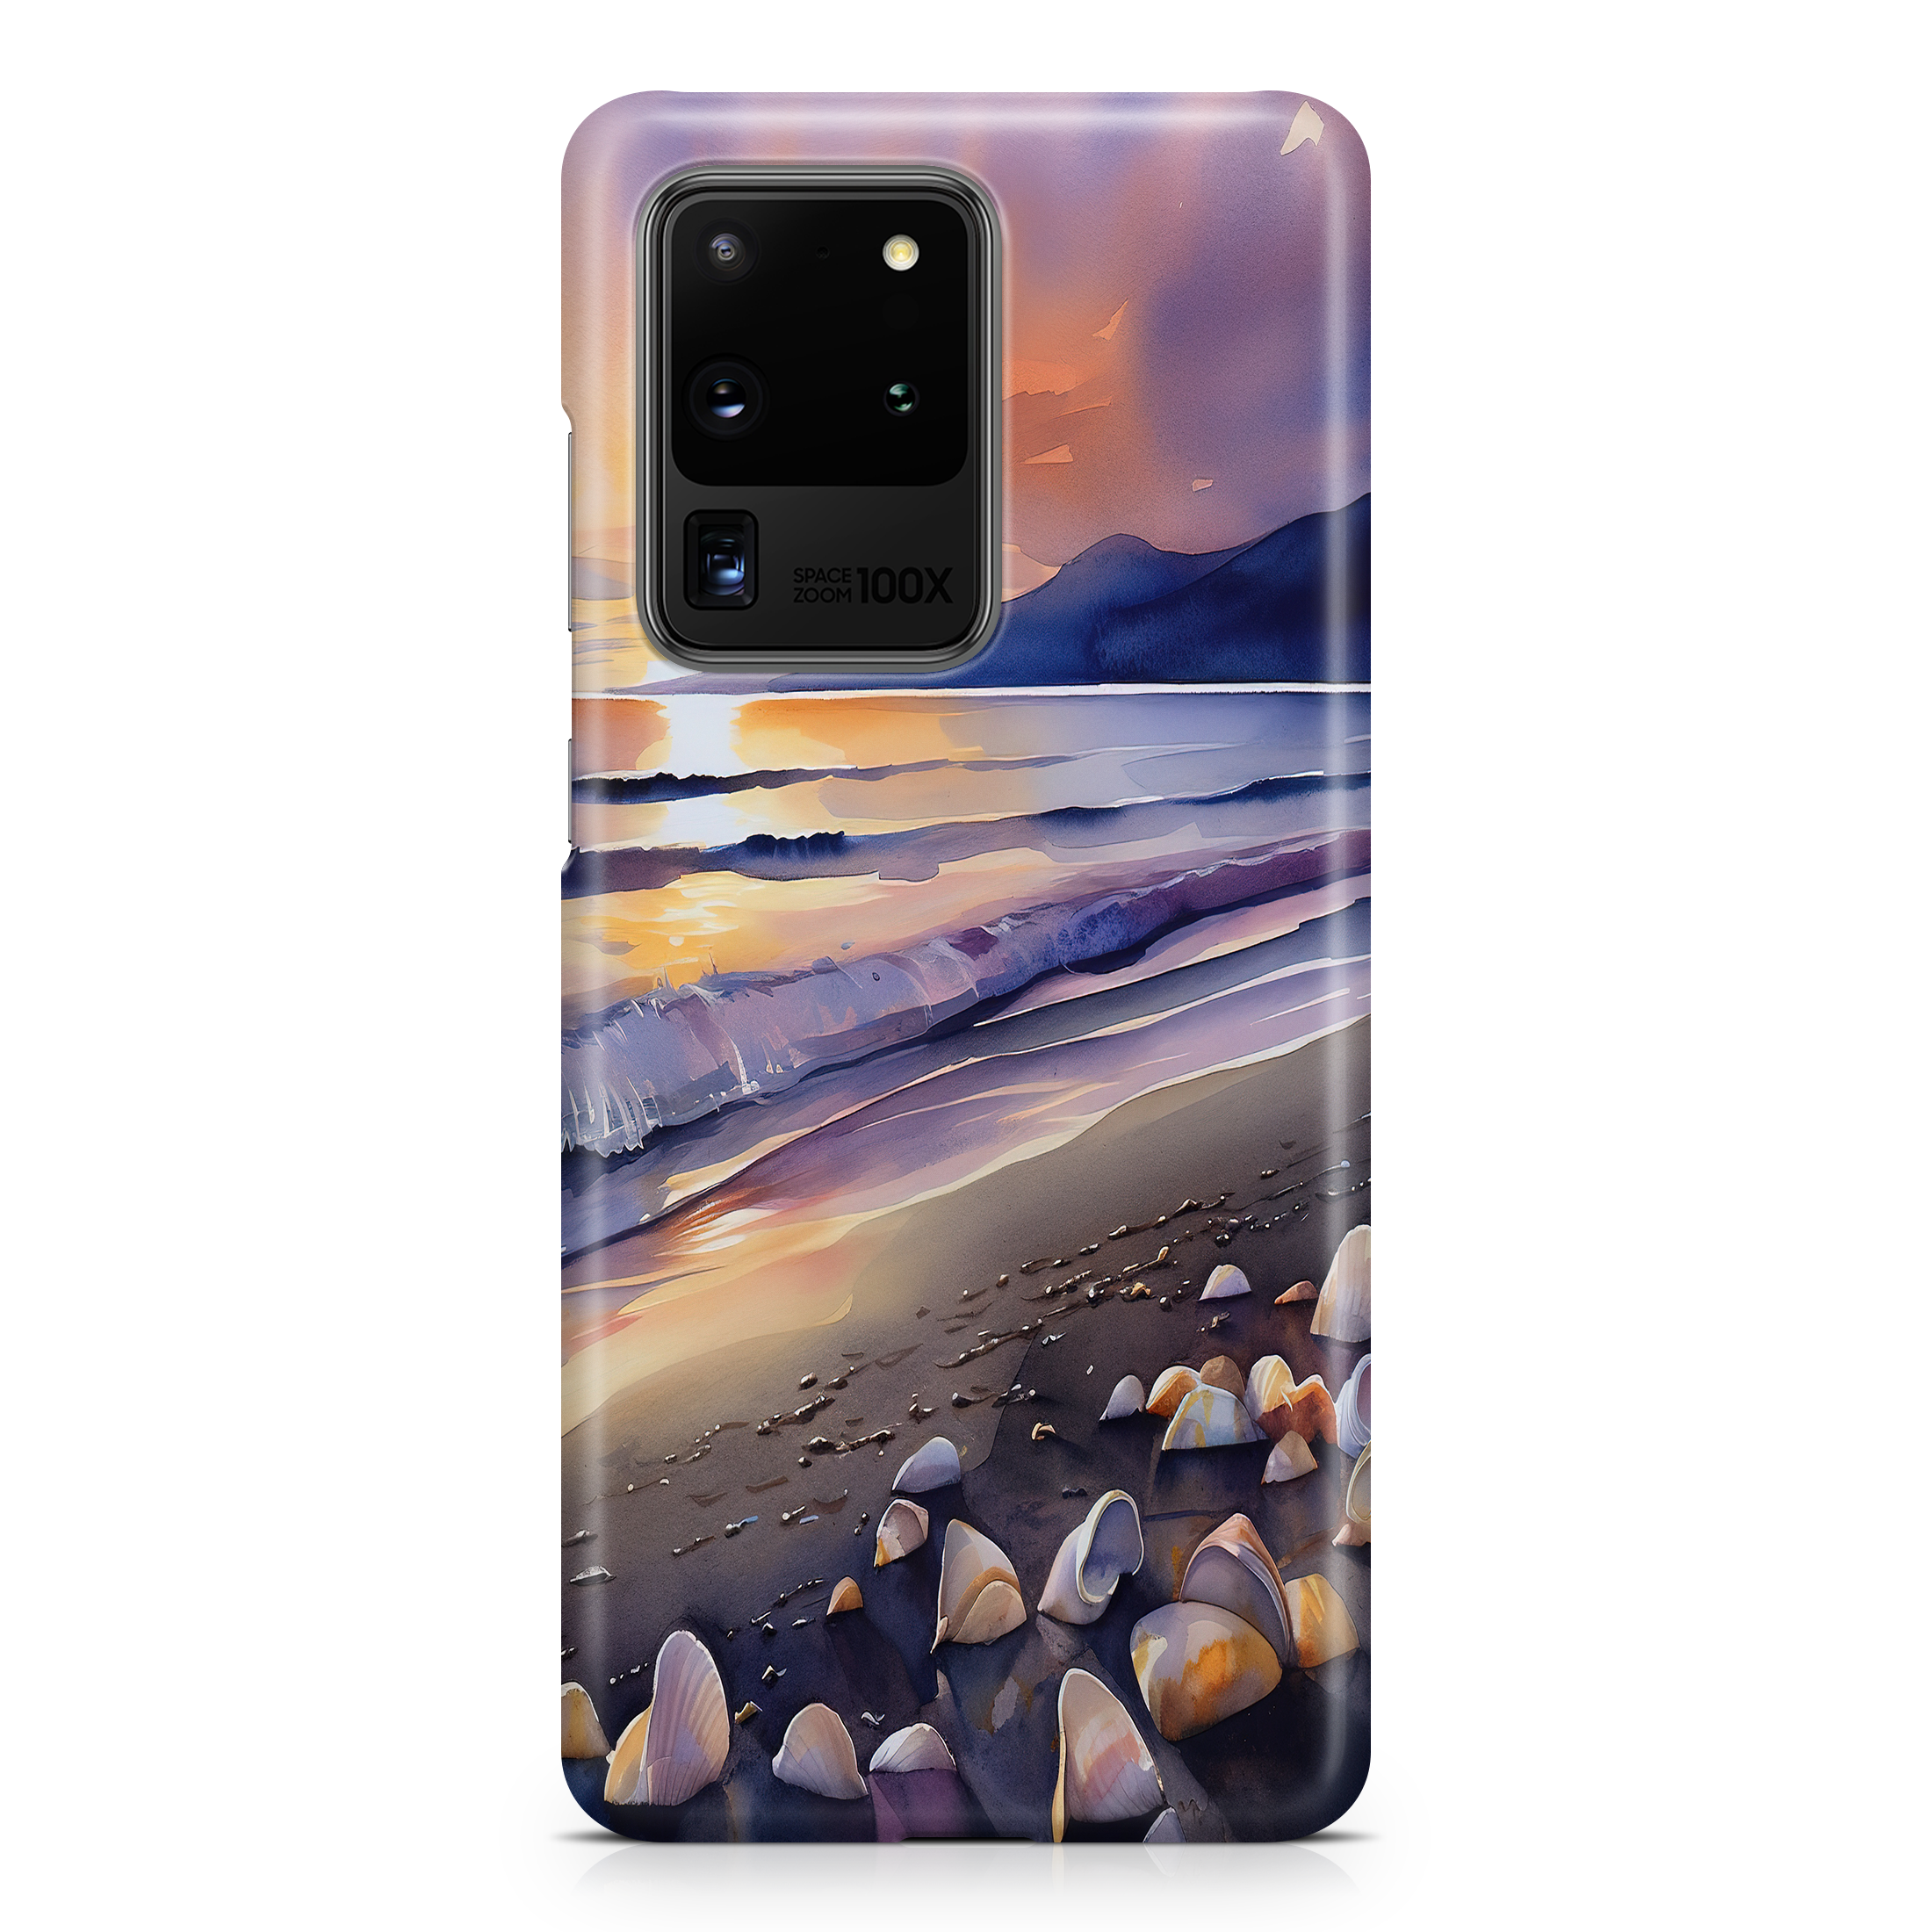 Watercolor Tides - Samsung phone case designs by CaseSwagger